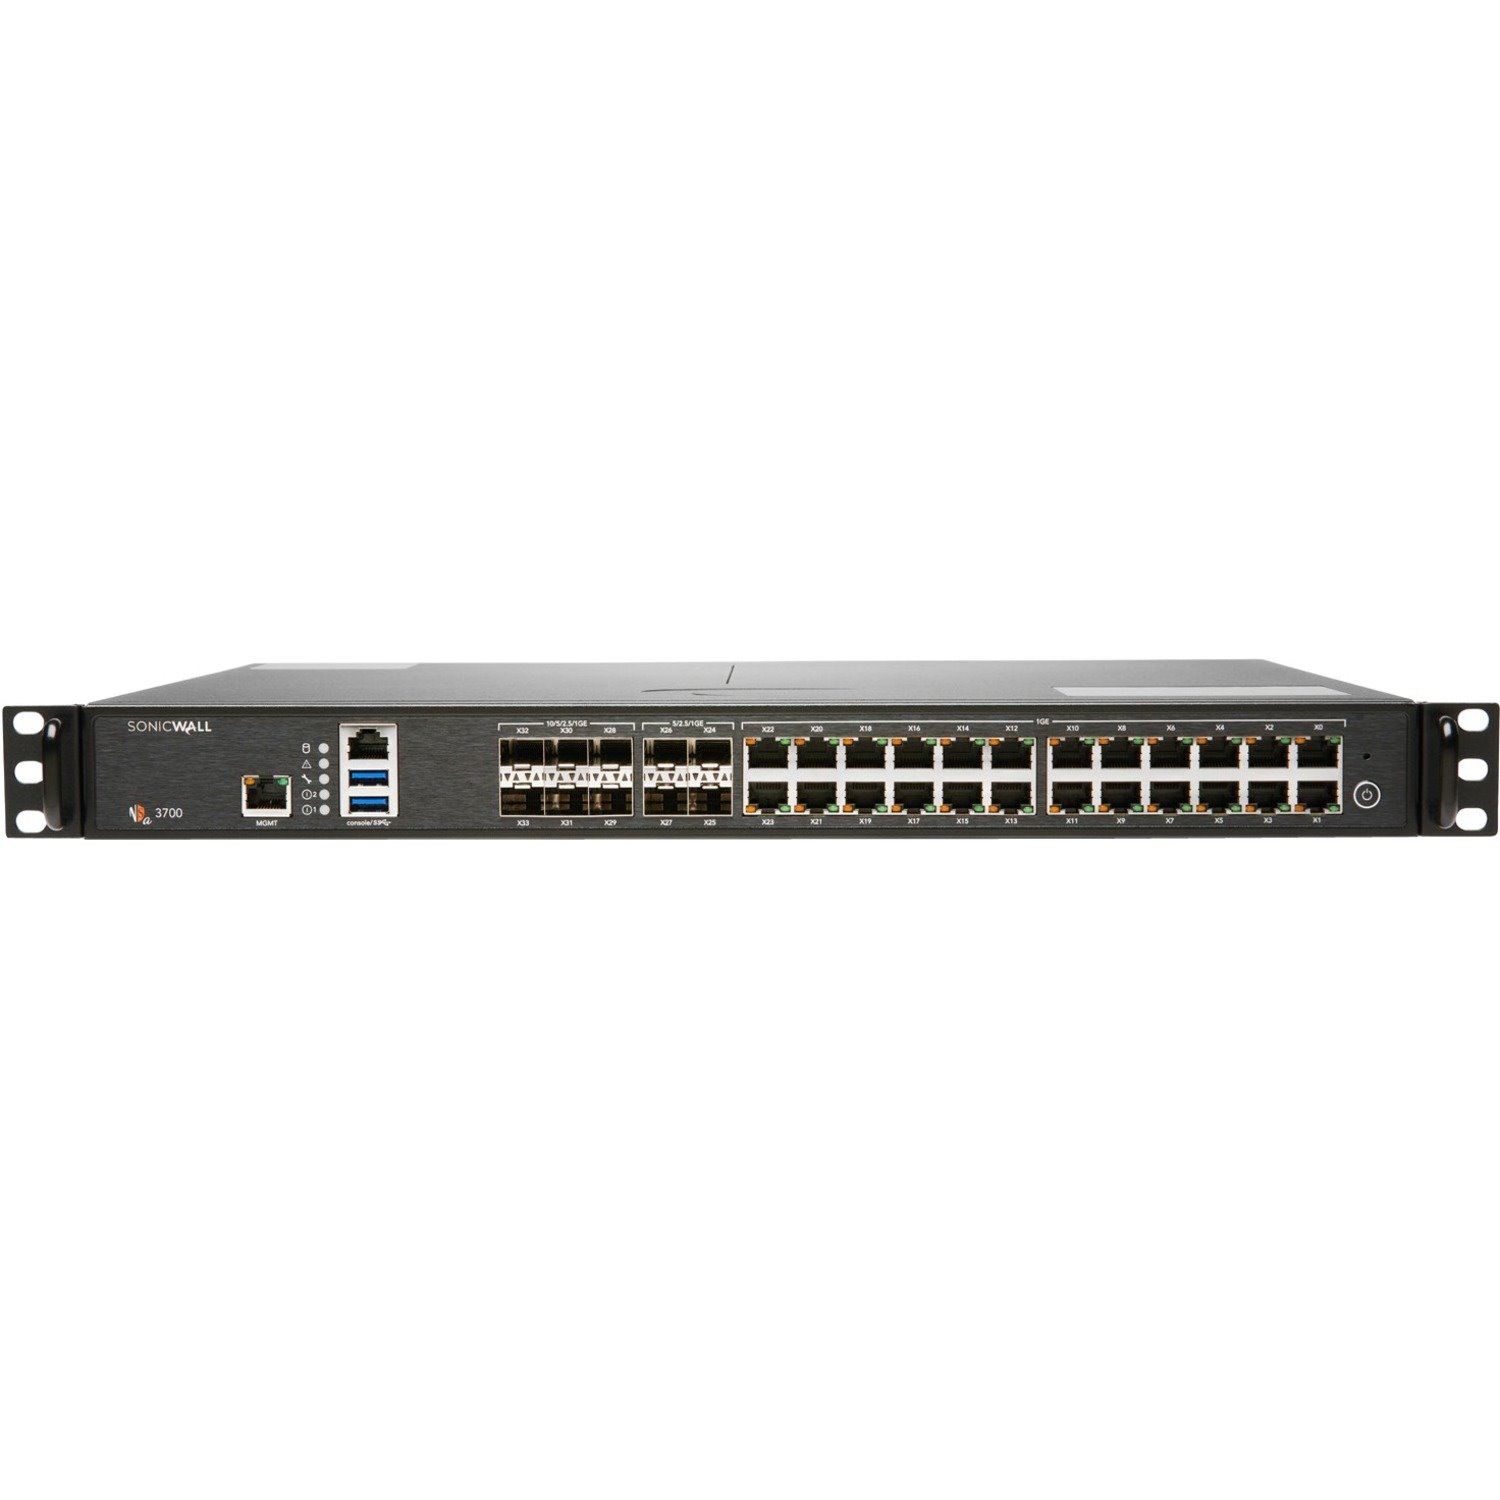 SonicWall 3700 Network Security/Firewall Appliance - 2 Year Secure Upgrade Plus Essential Edition